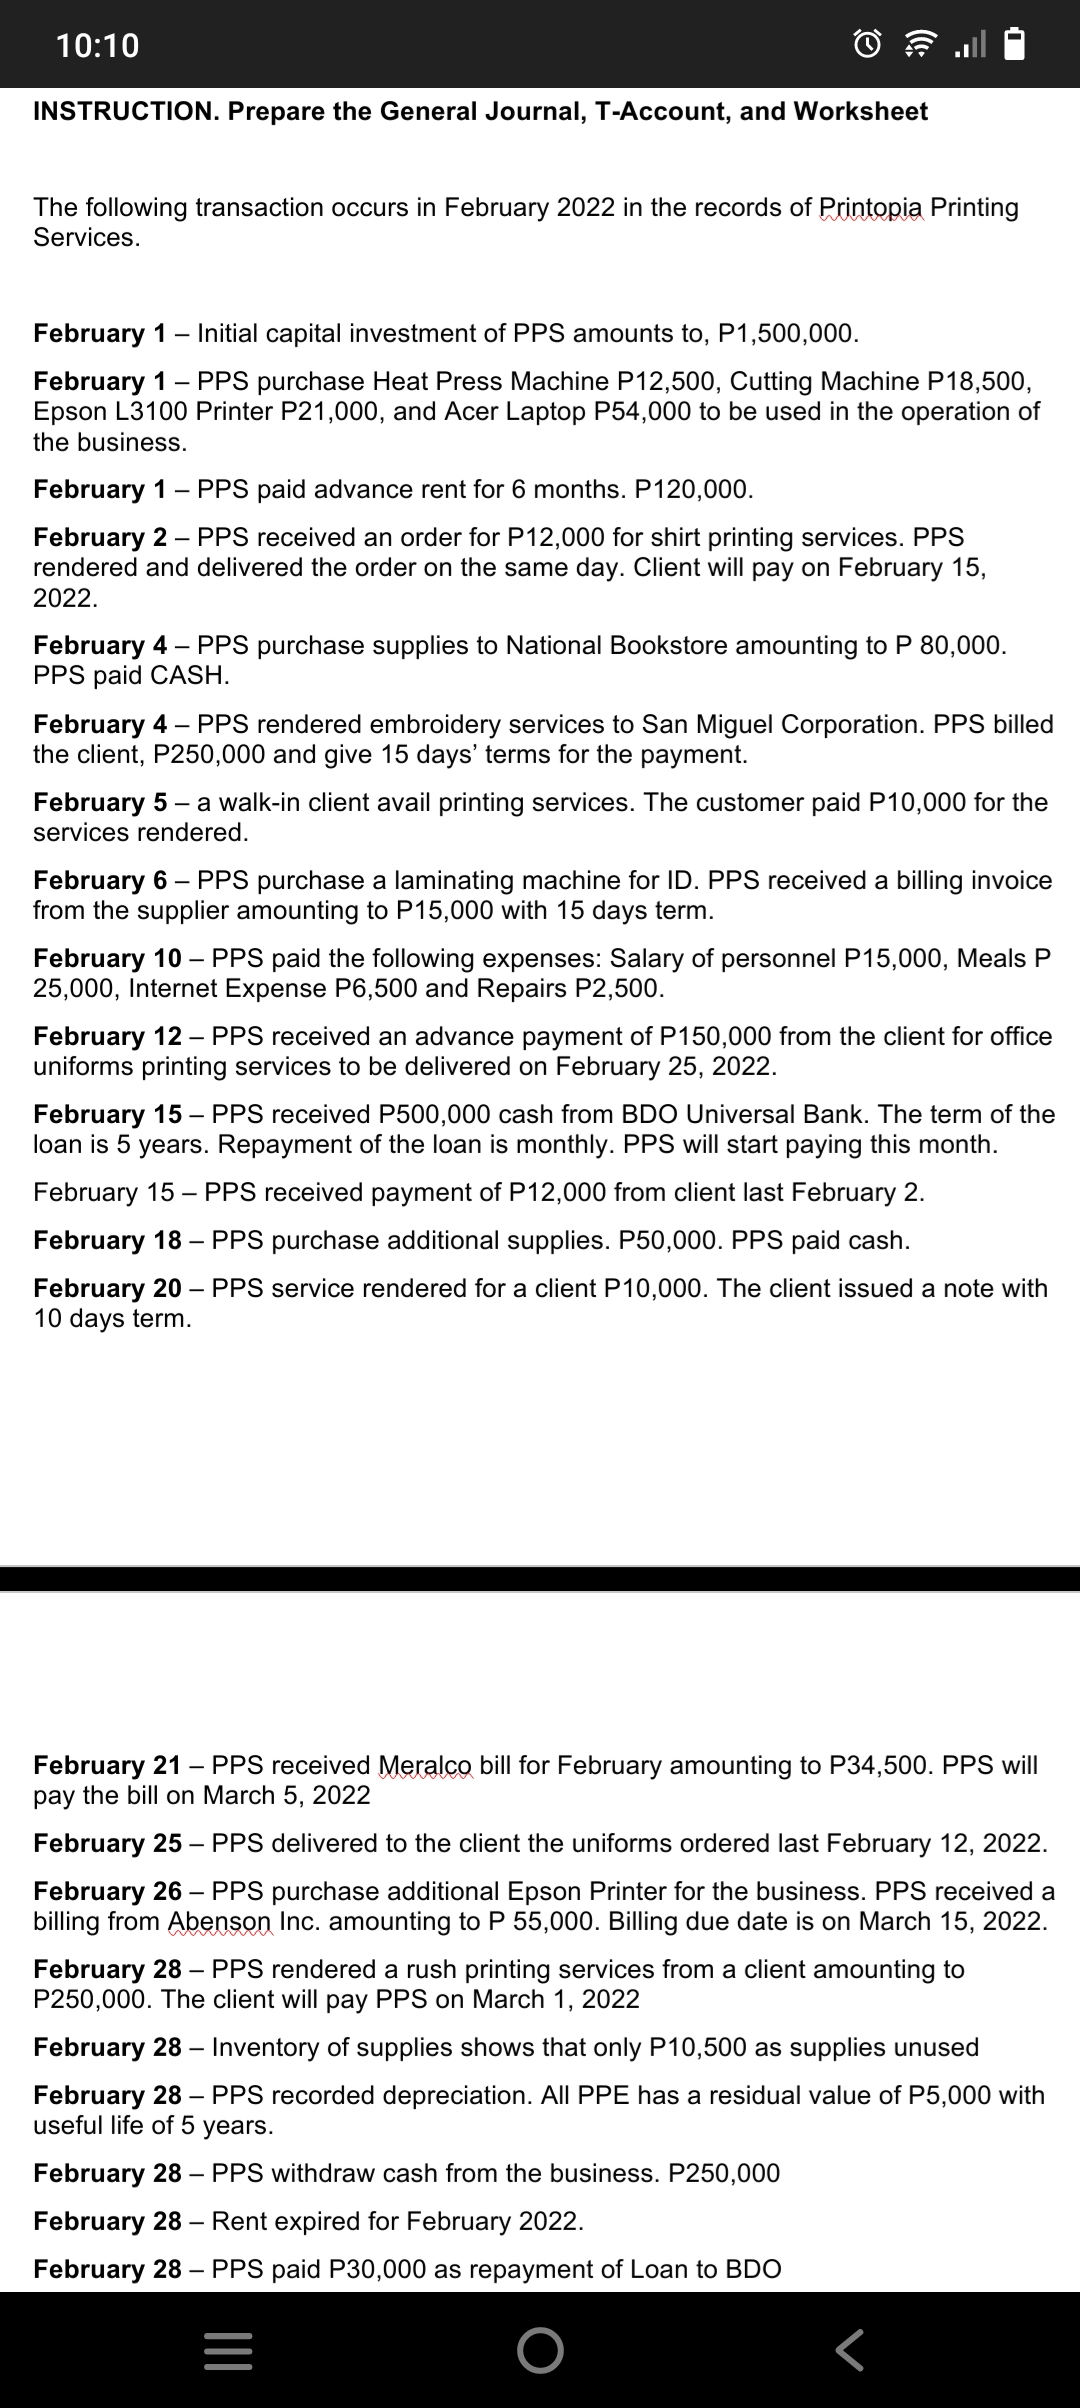 10:10
INSTRUCTION. Prepare the General Journal, T-Account, and Worksheet
The following transaction occurs in February 2022 in the records of Printopia Printing
Services.
February 1 - Initial capital investment of PPS amounts to, P1,500,000.
February 1 PPS purchase Heat Press Machine P12,500, Cutting Machine P18,500,
Epson L3100 Printer P21,000, and Acer Laptop P54,000 to be used in the operation of
the business.
February 1 - PPS paid advance rent for 6 months. P120,000.
February 2 - PPS received an order for P12,000 for shirt printing services. PPS
rendered and delivered the order on the same day. Client will pay on February 15,
2022.
February 4 - PPS purchase supplies to National Bookstore amounting to P 80,000.
PPS paid CASH.
February 4 - PPS rendered embroidery services to San Miguel Corporation. PPS billed
the client, P250,000 and give 15 days' terms for the payment.
February 5 - a walk-in client avail printing services. The customer paid P10,000 for the
services rendered.
February 6 - PPS purchase a laminating machine for ID. PPS received a billing invoice
from the supplier amounting to P15,000 with 15 days term.
February 10 - PPS paid the following expenses: Salary of personnel P15,000, Meals P
25,000, Internet Expense P6,500 and Repairs P2,500.
February 12 - PPS received an advance payment of P150,000 from the client for office
uniforms printing services to be delivered on February 25, 2022.
February 15 - PPS received P500,000 cash from BDO Universal Bank. The term of the
loan is 5 years. Repayment of the loan is monthly. PPS will start paying this month.
February 15 - PPS received payment of P12,000 from client last February 2.
February 18 - PPS purchase additional supplies. P50,000. PPS paid cash.
February 20 PPS service rendered for a client P10,000. The client issued a note with
10 days term.
-
February 21 PPS received Meralco bill for February amounting to P34,500. PPS will
pay the bill on March 5, 2022
February 25 - PPS delivered to the client the uniforms ordered last February 12, 2022.
February 26 - PPS purchase additional Epson Printer for the business. PPS received a
billing from Abenson Inc. amounting to P 55,000. Billing due date is on March 15, 2022.
February 28 - PPS rendered a rush printing services from a client amounting to
P250,000. The client will pay PPS on March 1, 2022
February 28 - Inventory of supplies shows that only P10,500 as supplies unused
February 28 - PPS recorded depreciation. All PPE has a residual value of P5,000 with
useful life of 5 years.
February 28 - PPS withdraw cash from the business. P250,000
February 28 - Rent expired for February 2022.
February 28 - PPS paid P30,000 as repayment of Loan to BDO
Г